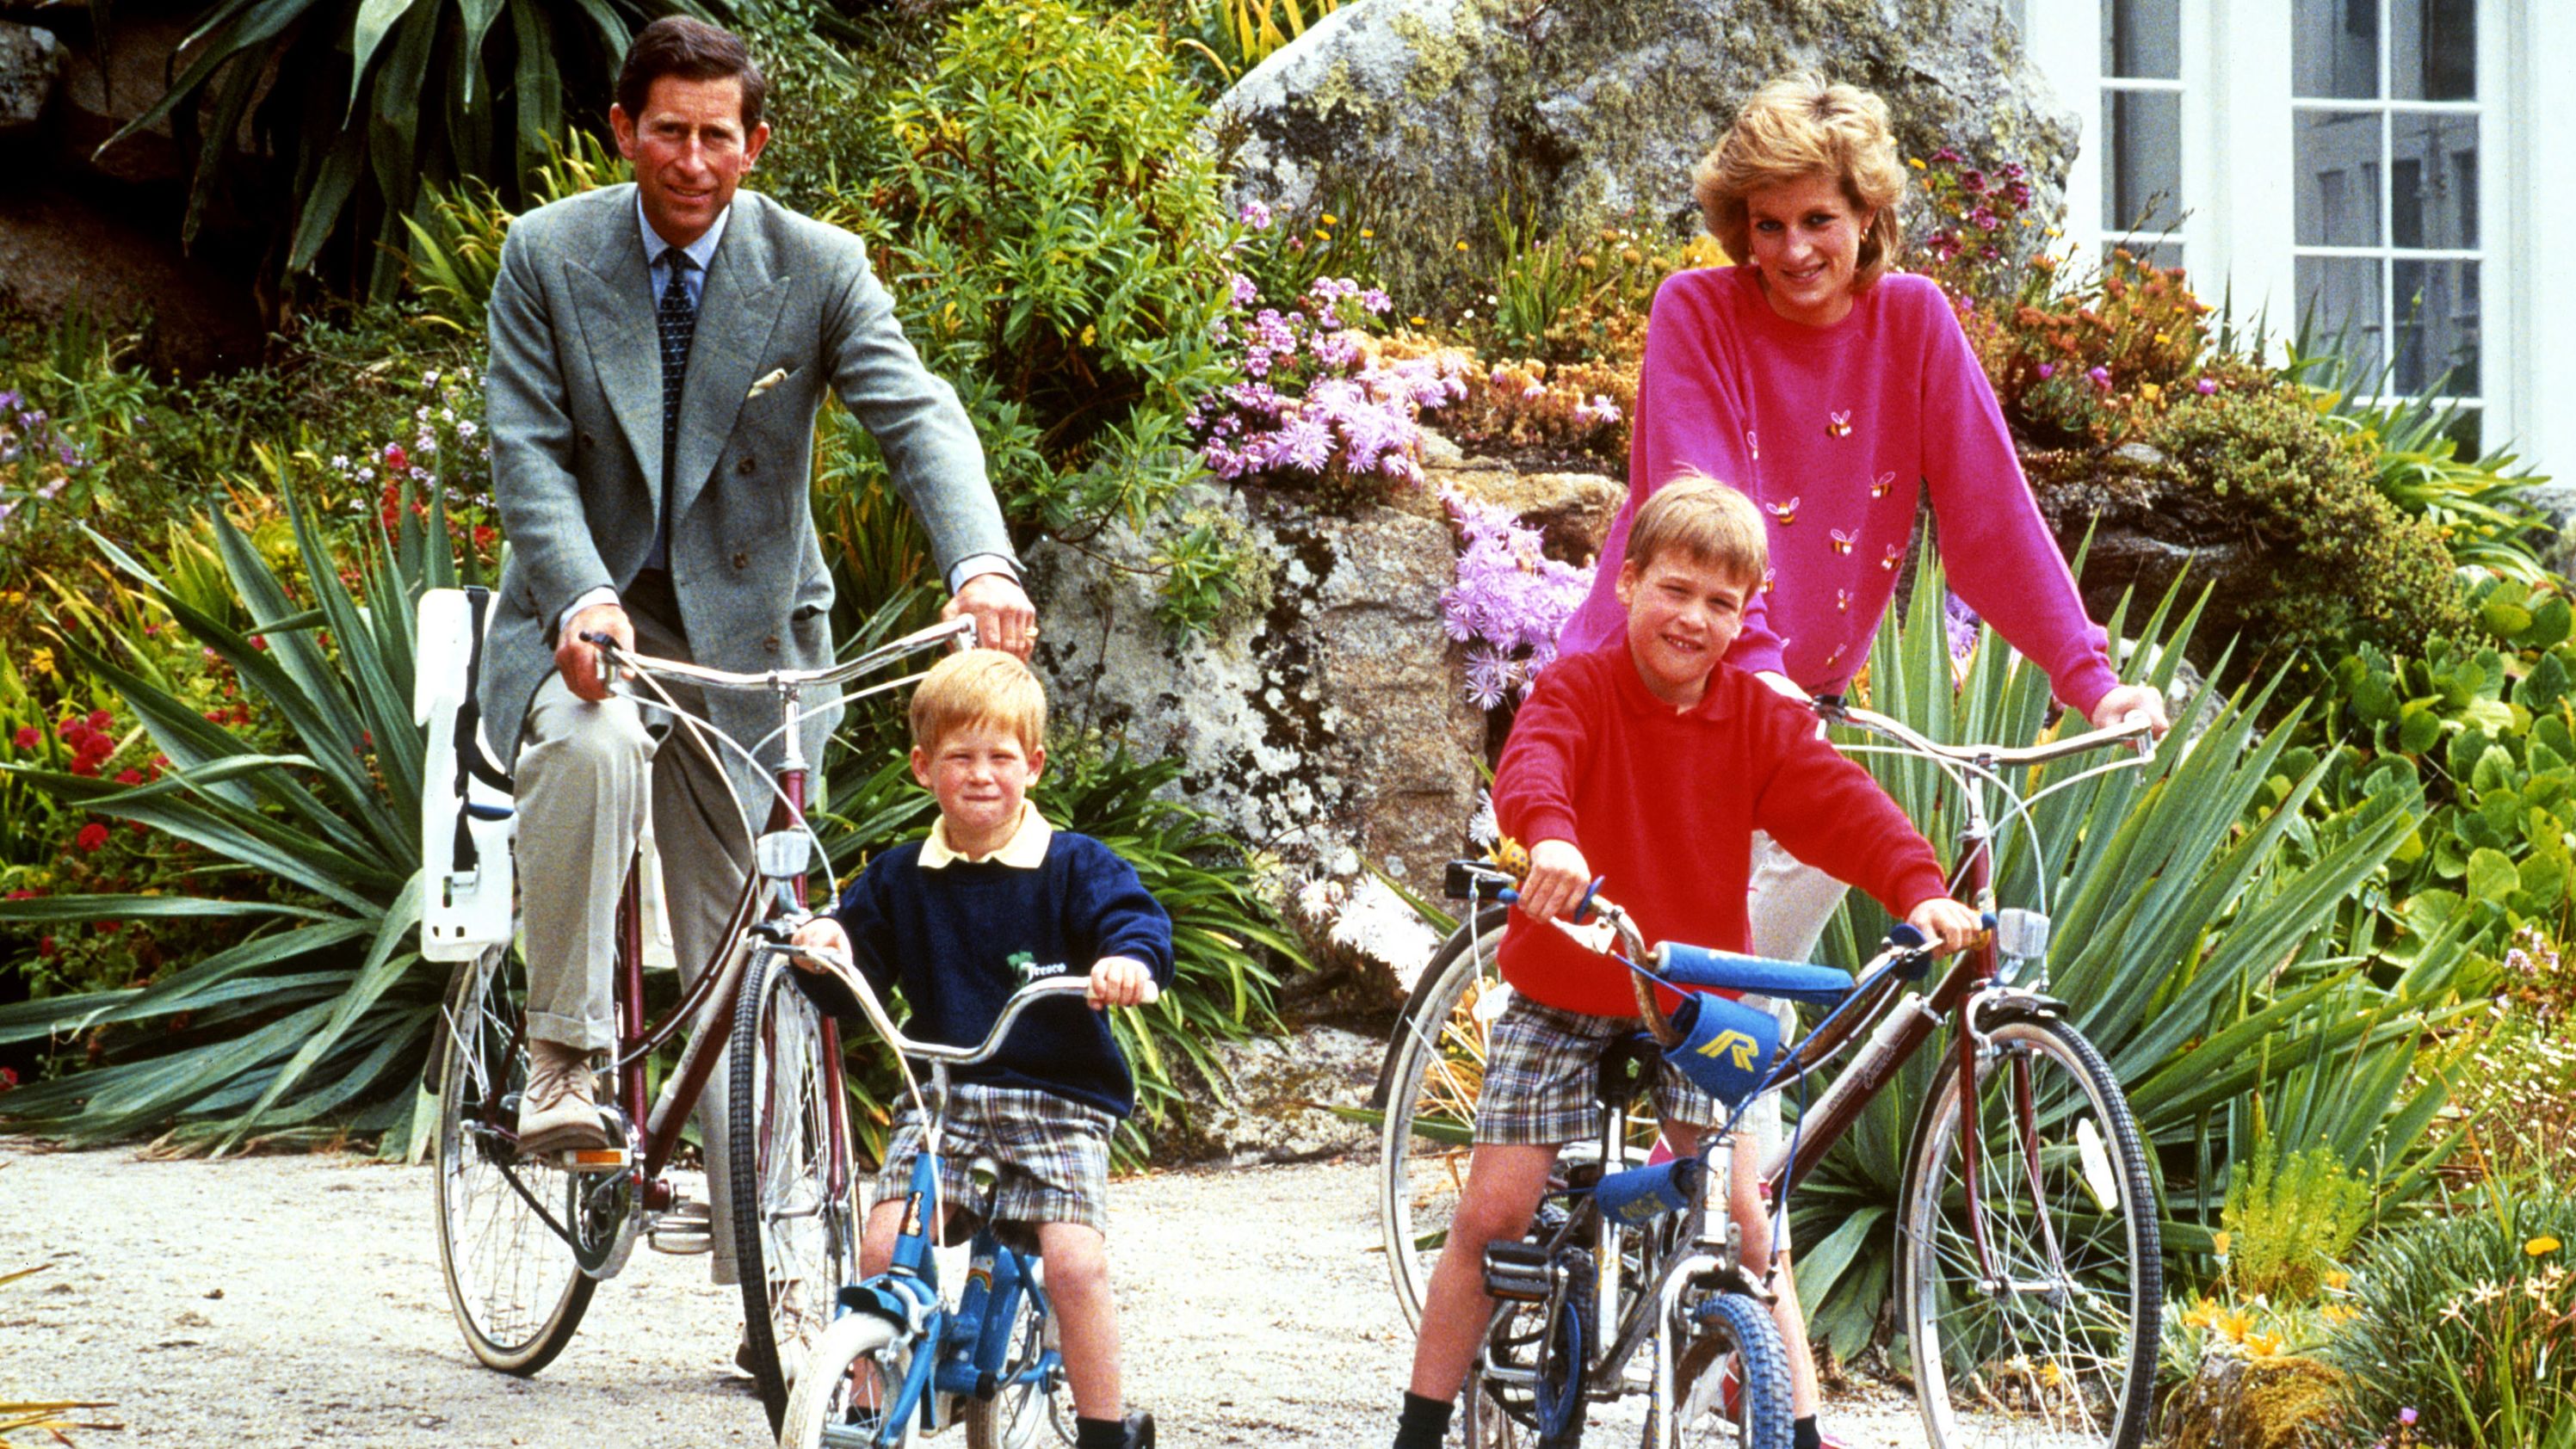 William and Harry ride bicycles with their parents while on vacation in the Isles of Scilly in 1989.